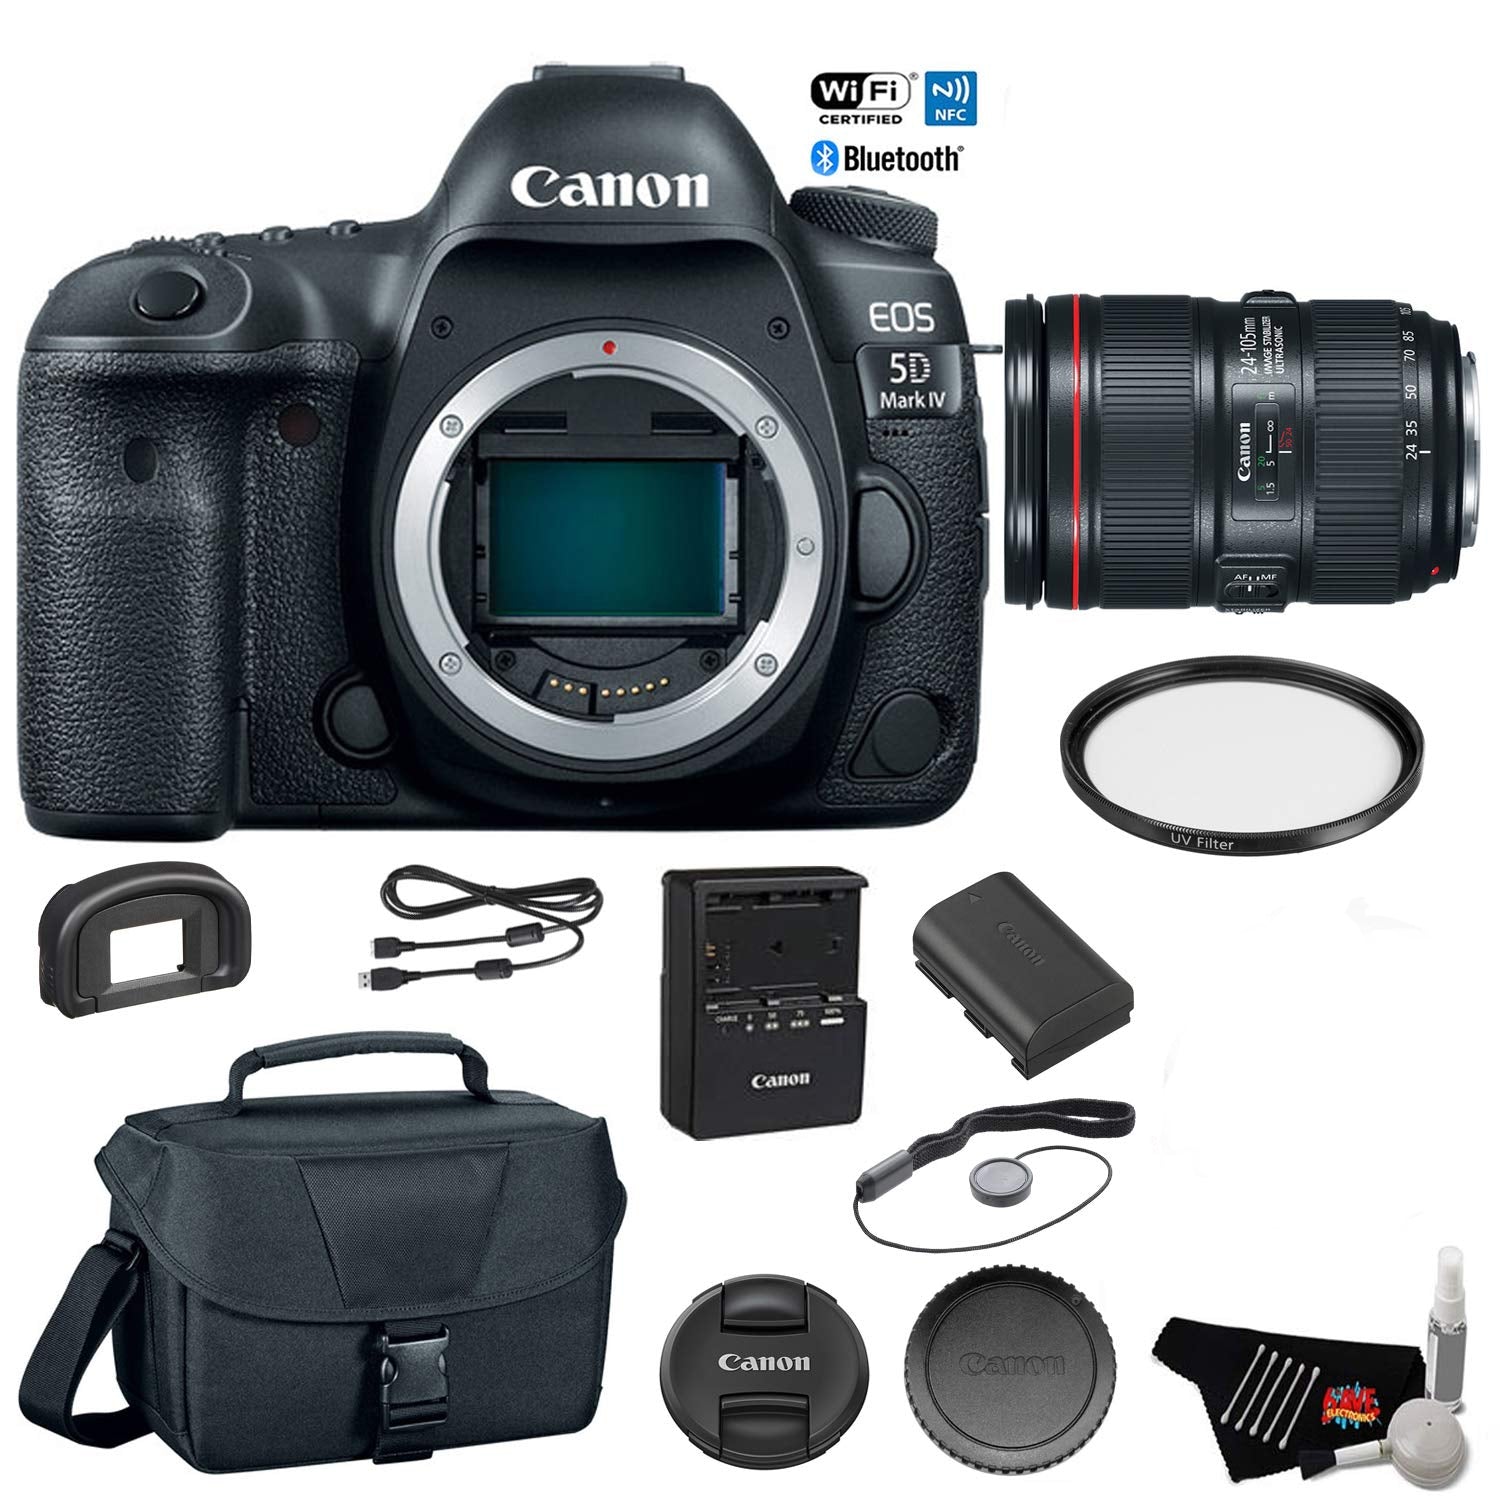 Canon EOS 5D Mark IV Digital SLR Camera with 24-105mm f/4L II Lens - Bundle with UV Filter + Canon Carrying Bag + Cleani